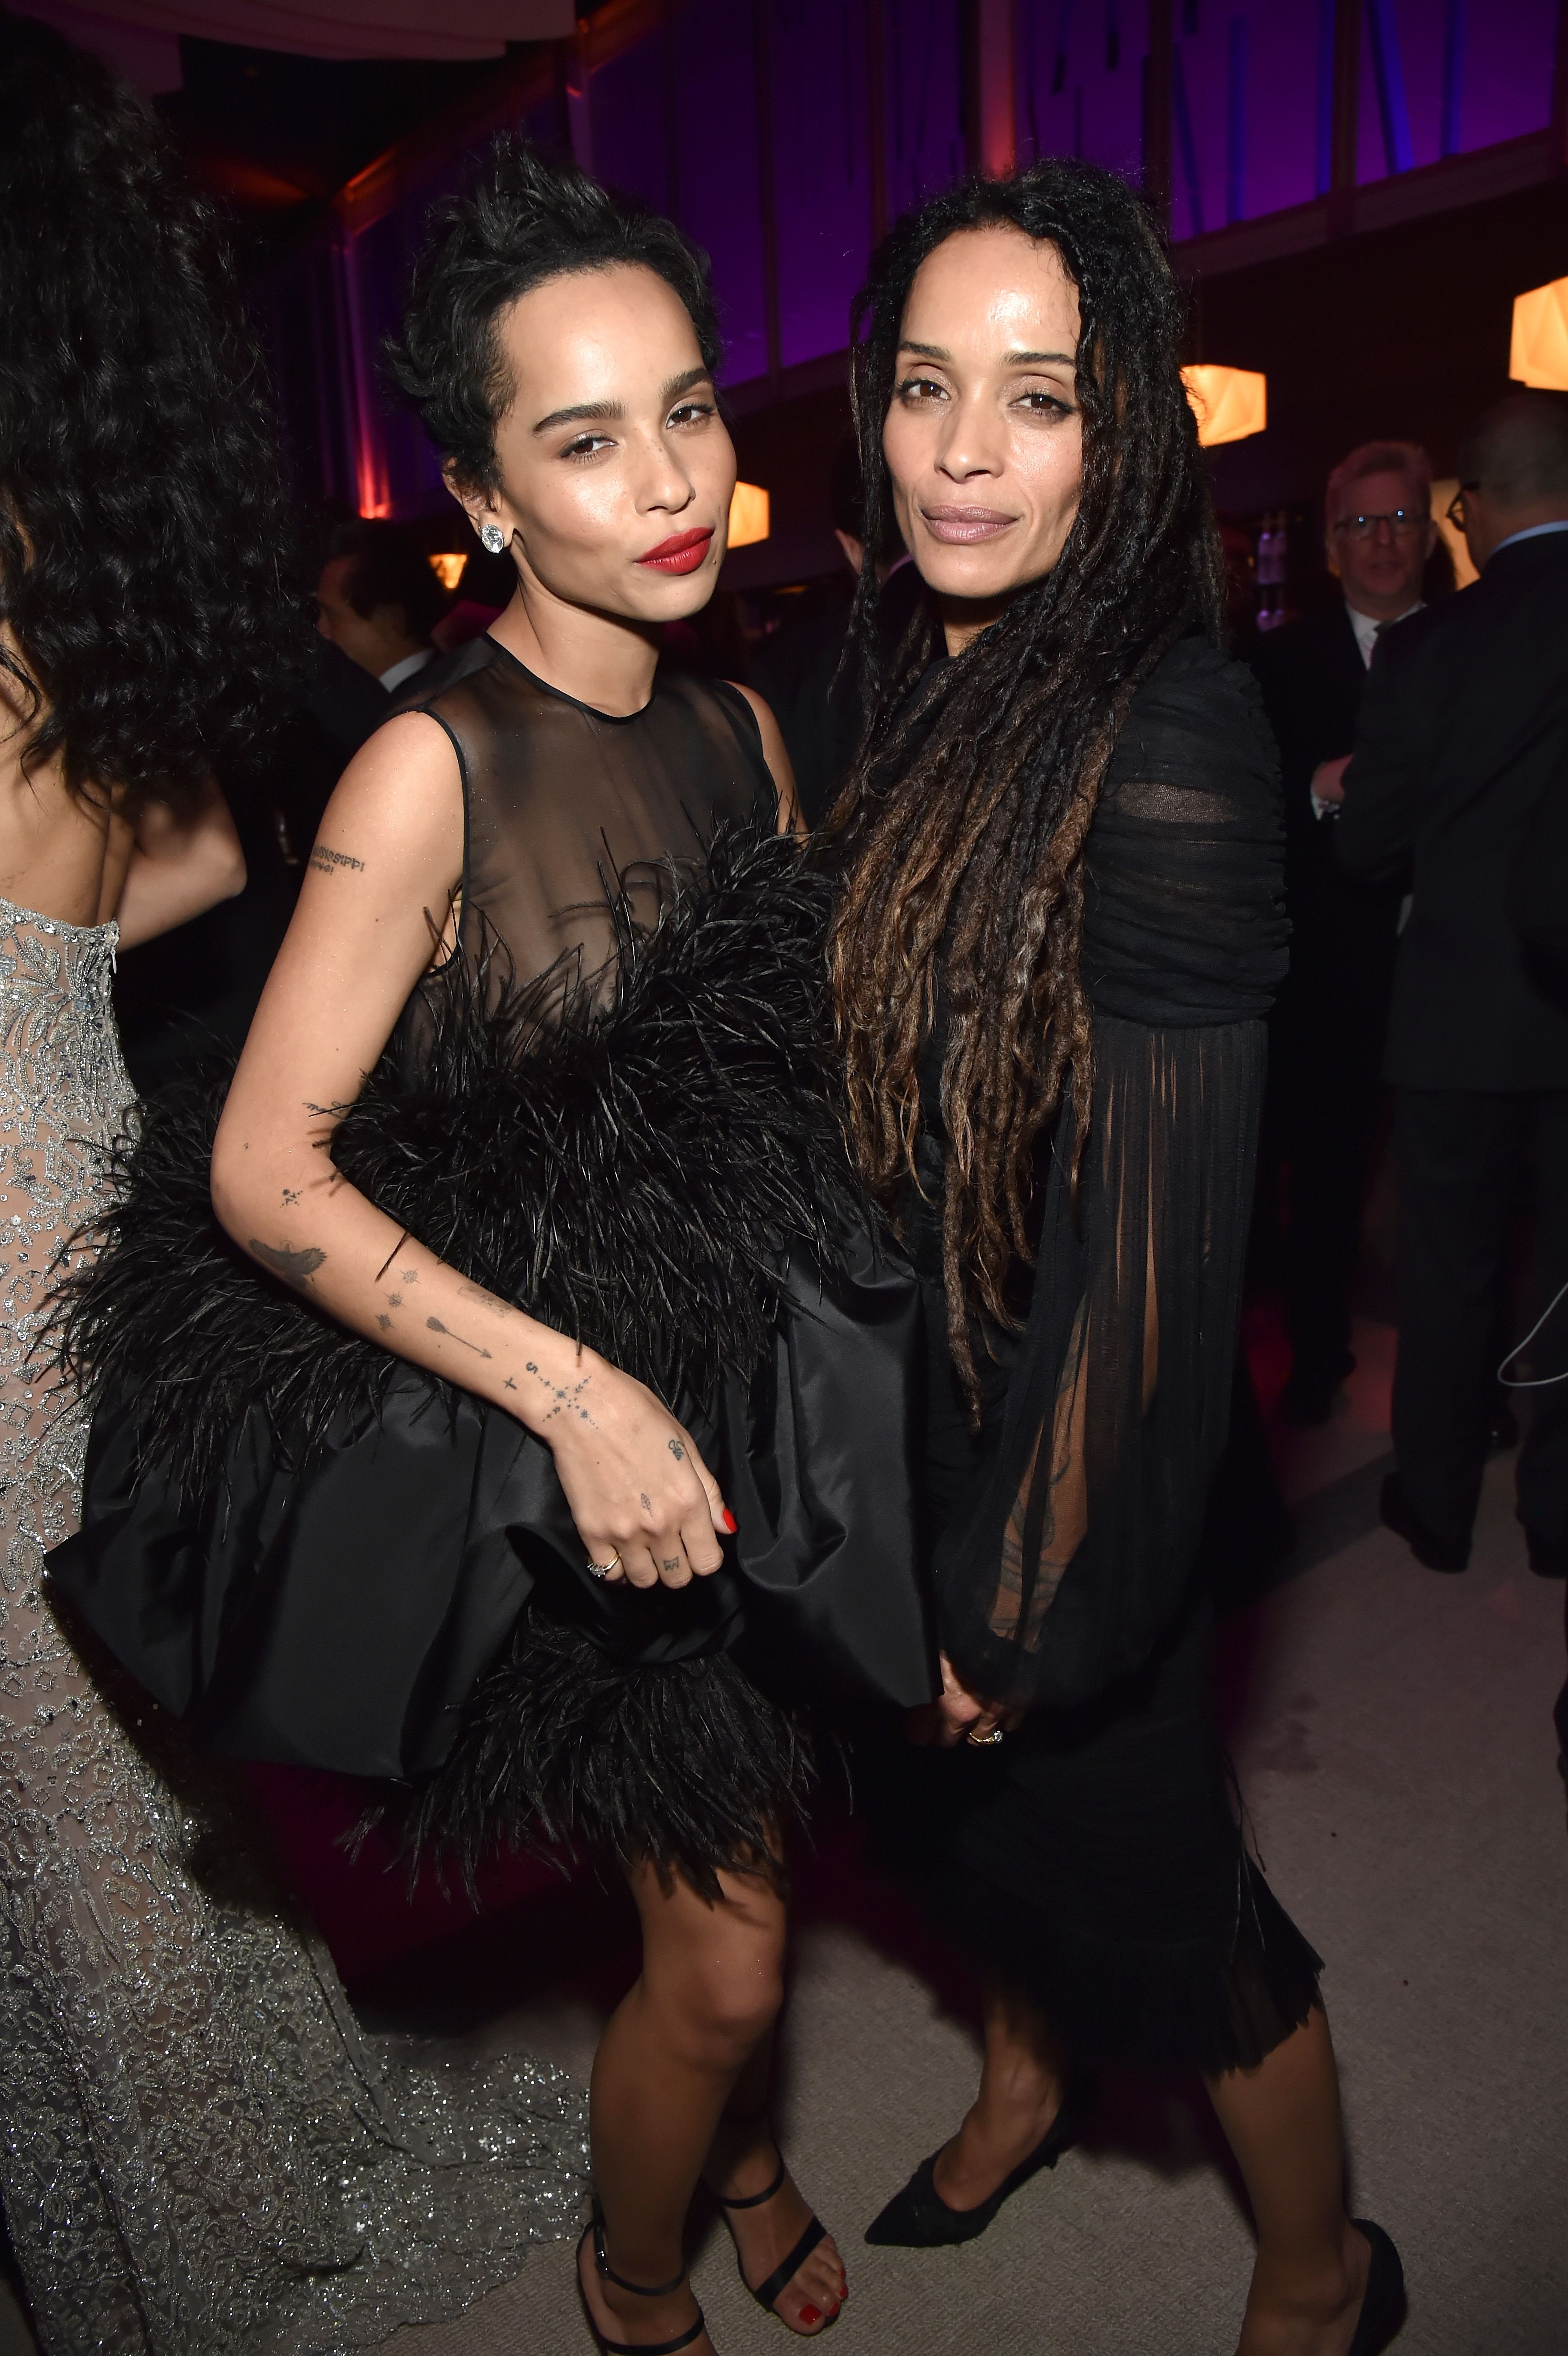 bobby robbins share lisa bonet nude pictures photos